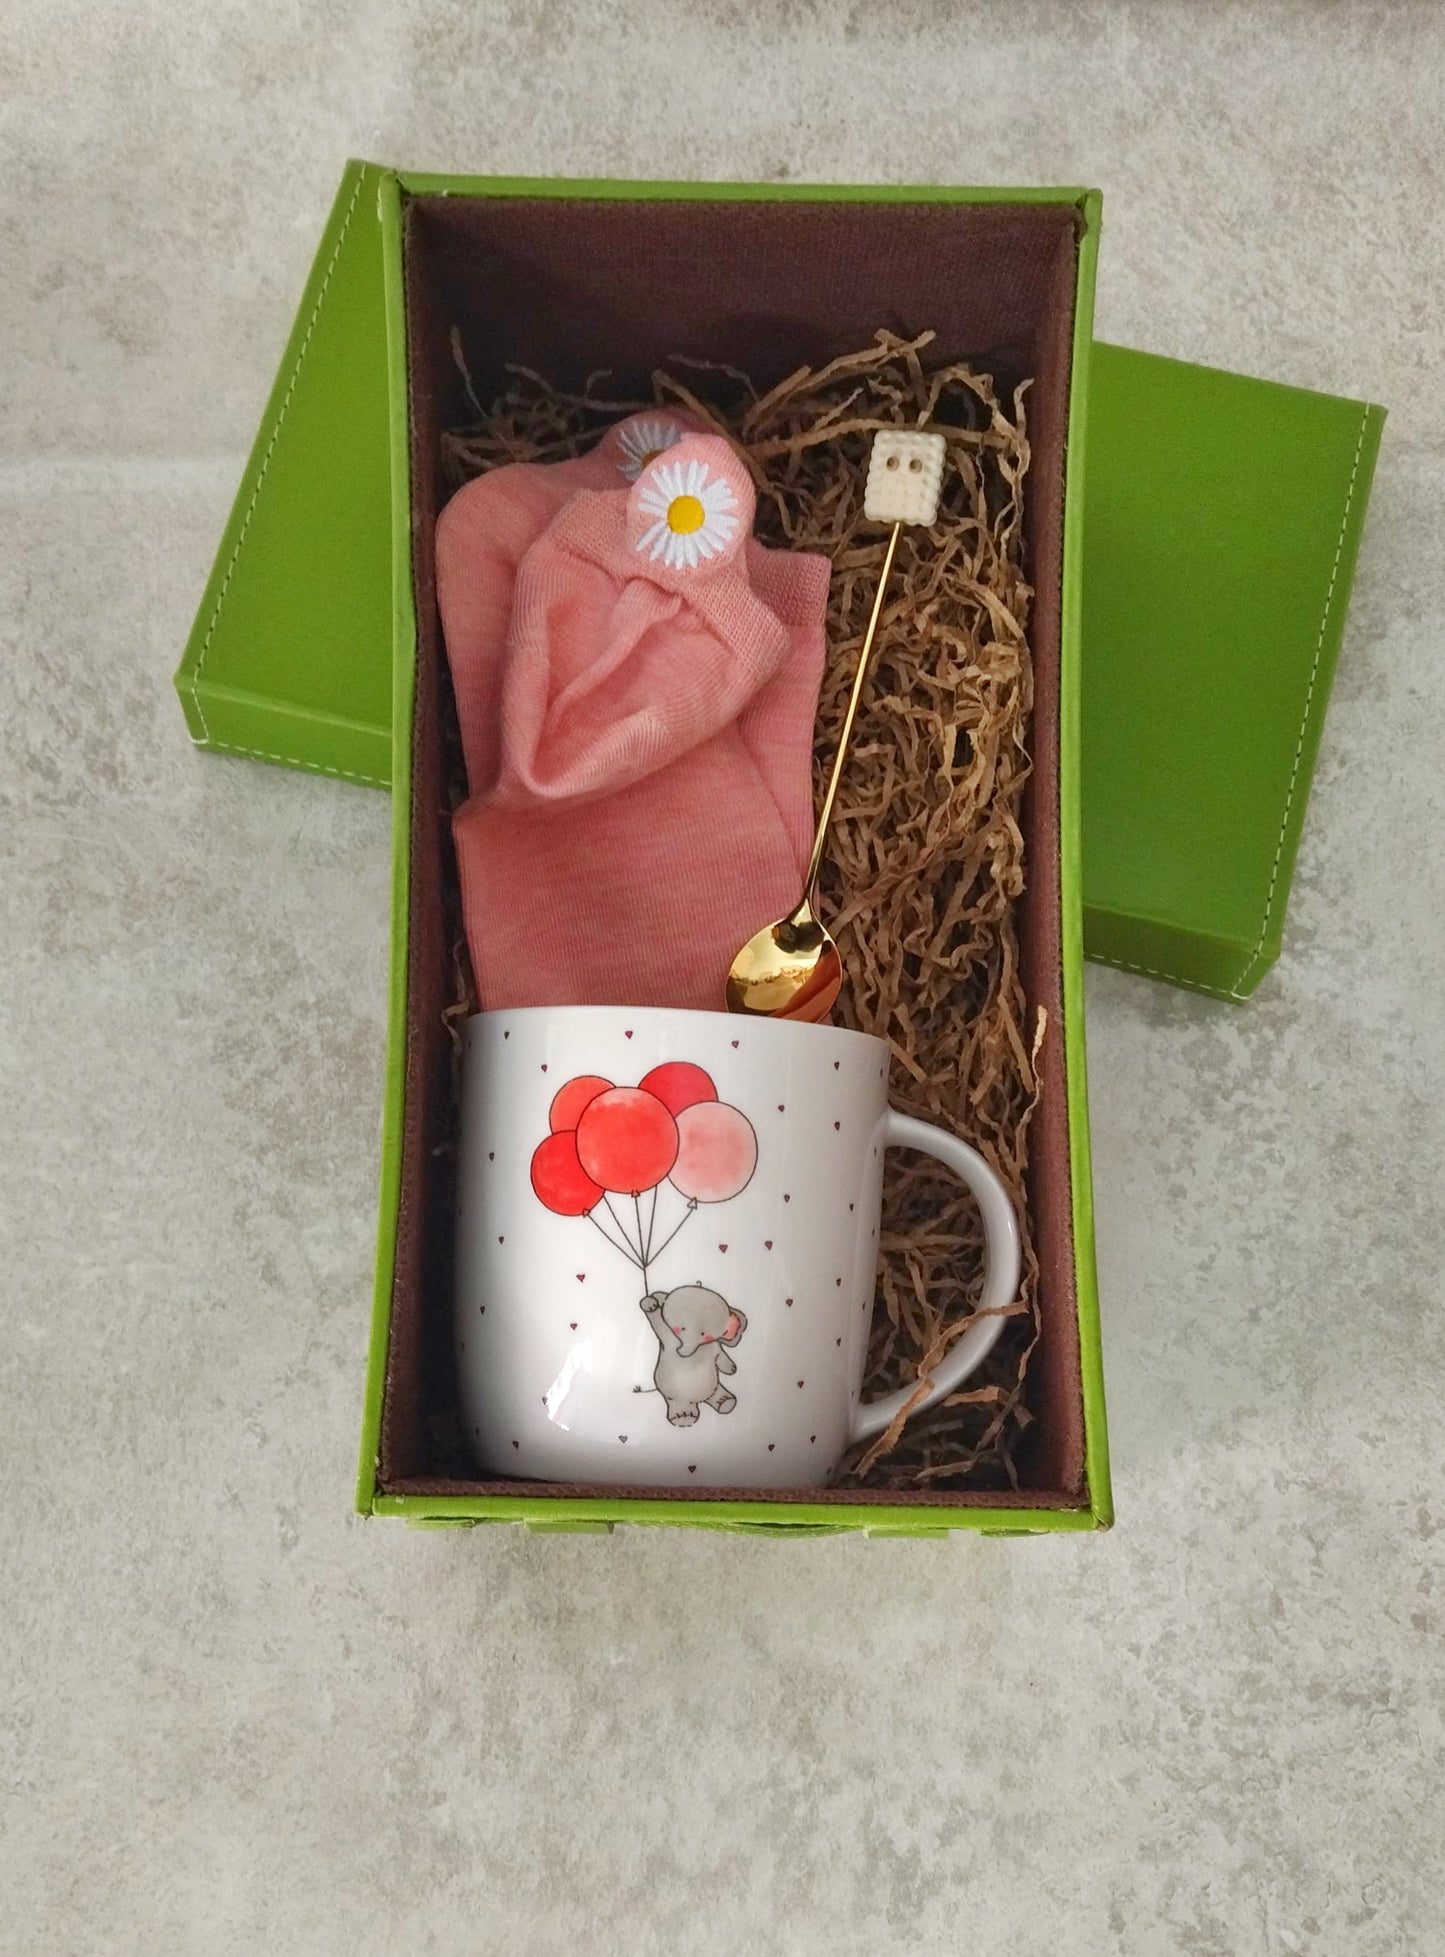 Hug In A Box, Cute Ceramic Cup With Christmas Spoon And Embroidered Socks